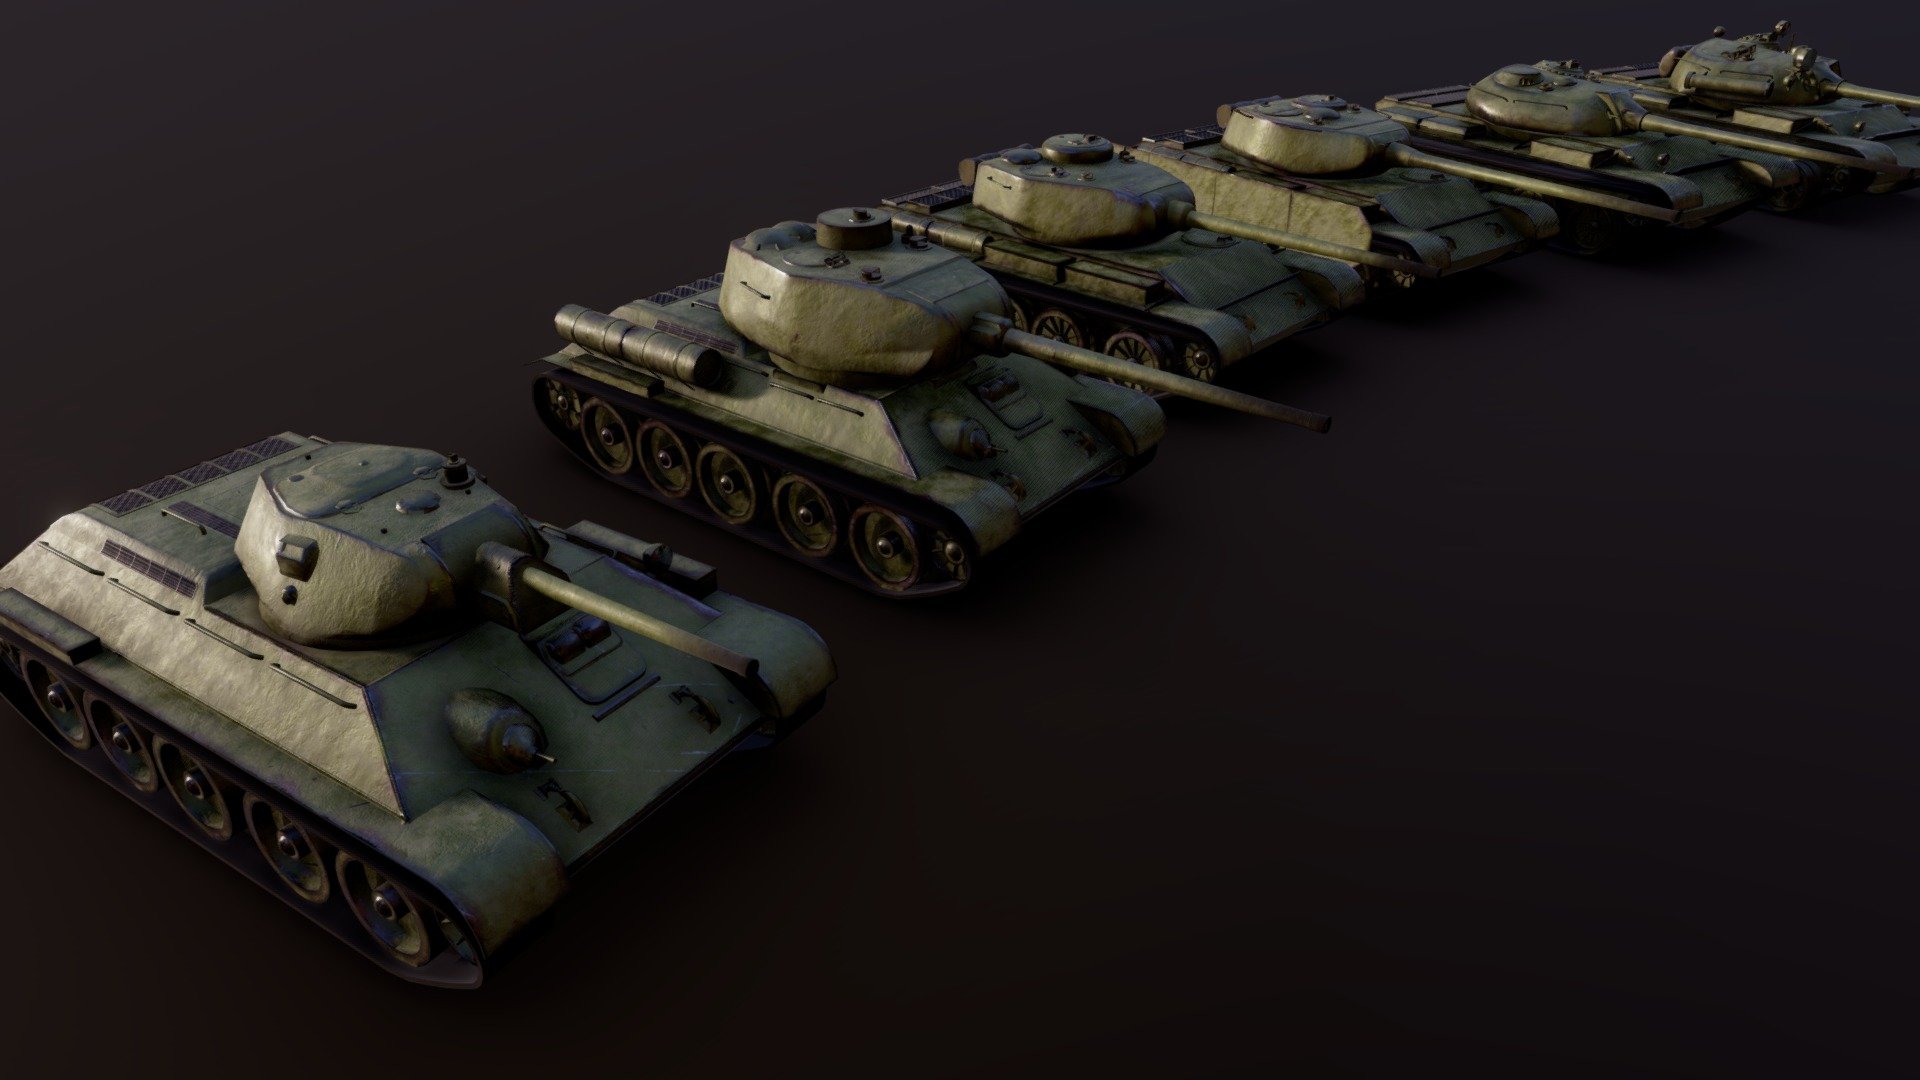 T-34, T-34-85, T-44, T-44-100, T-54, T-55A

Tool used : Blender, Substance 3D Painter, Photoshop
Referred to games World of Tank and WarThunder - Soviet Medium Tanks - Download Free 3D model by snrnsrk5 3d model